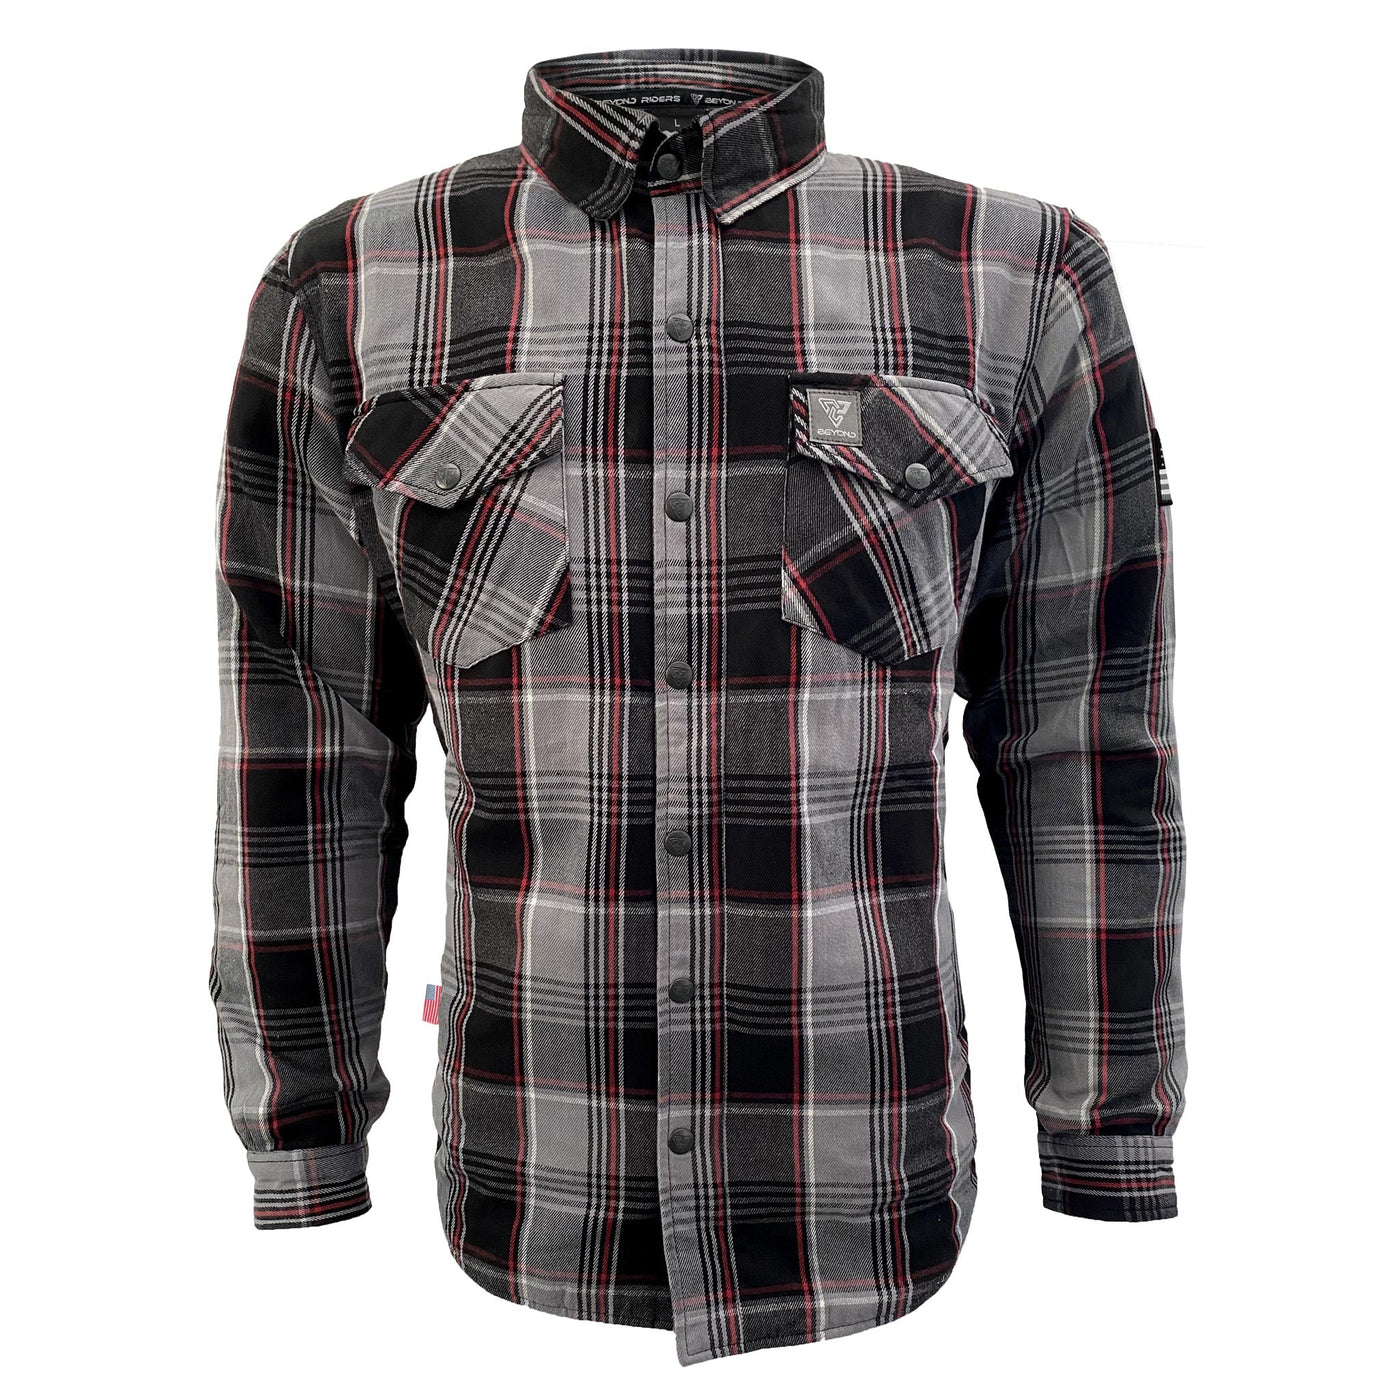 Protective Flannel Shirt For Men with Pads - Grey, Black, Red Checkered